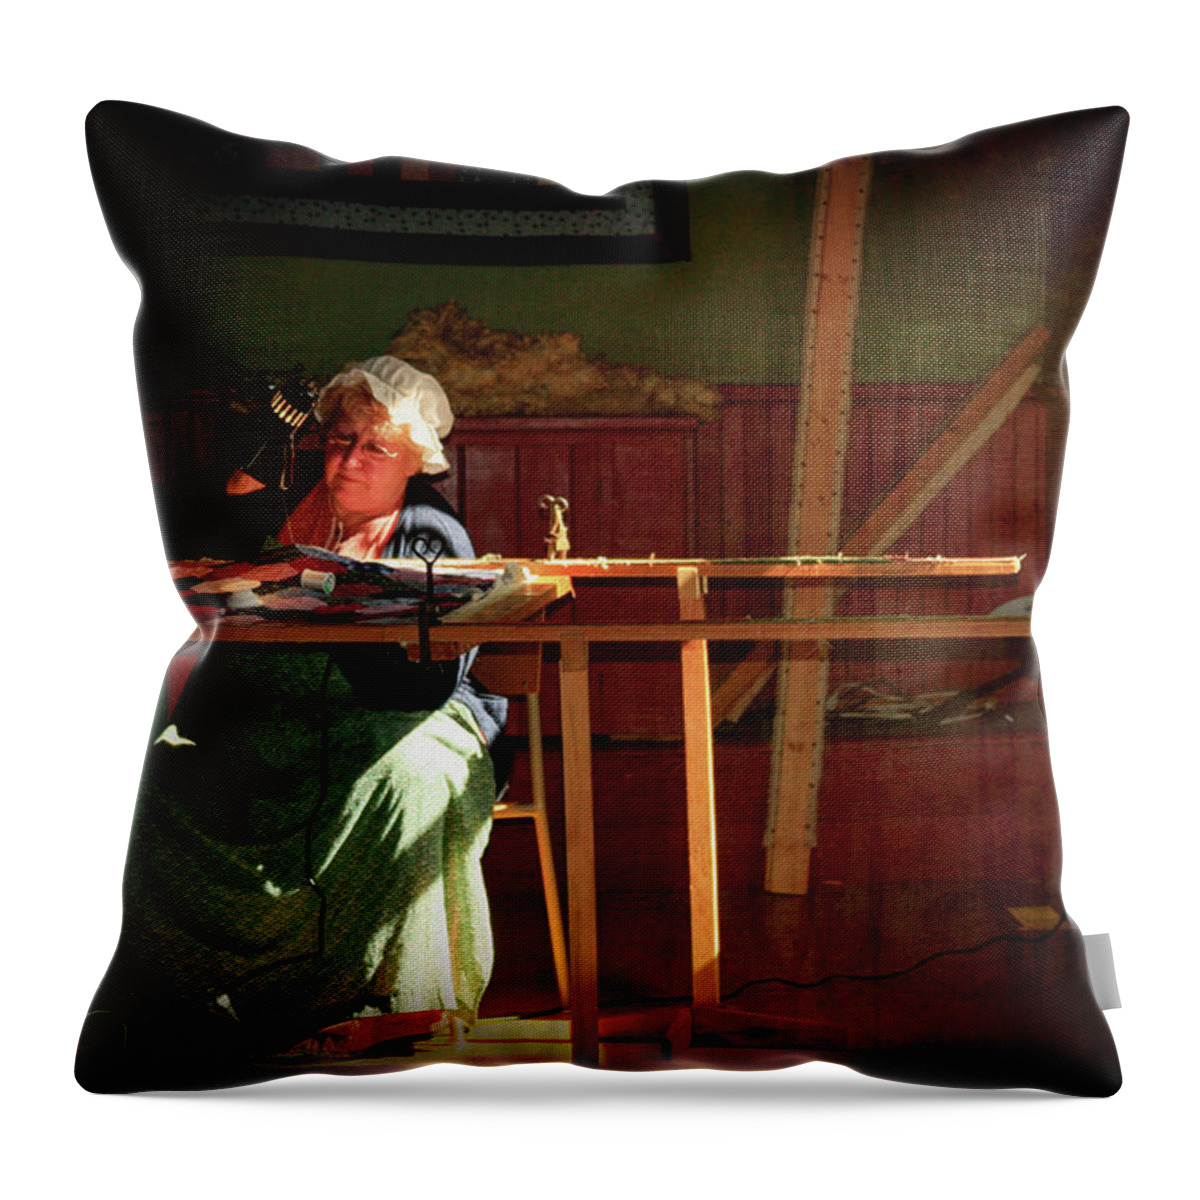 Quilt Maker Throw Pillow featuring the photograph Old time quilt maker in the window light by Tatiana Travelways